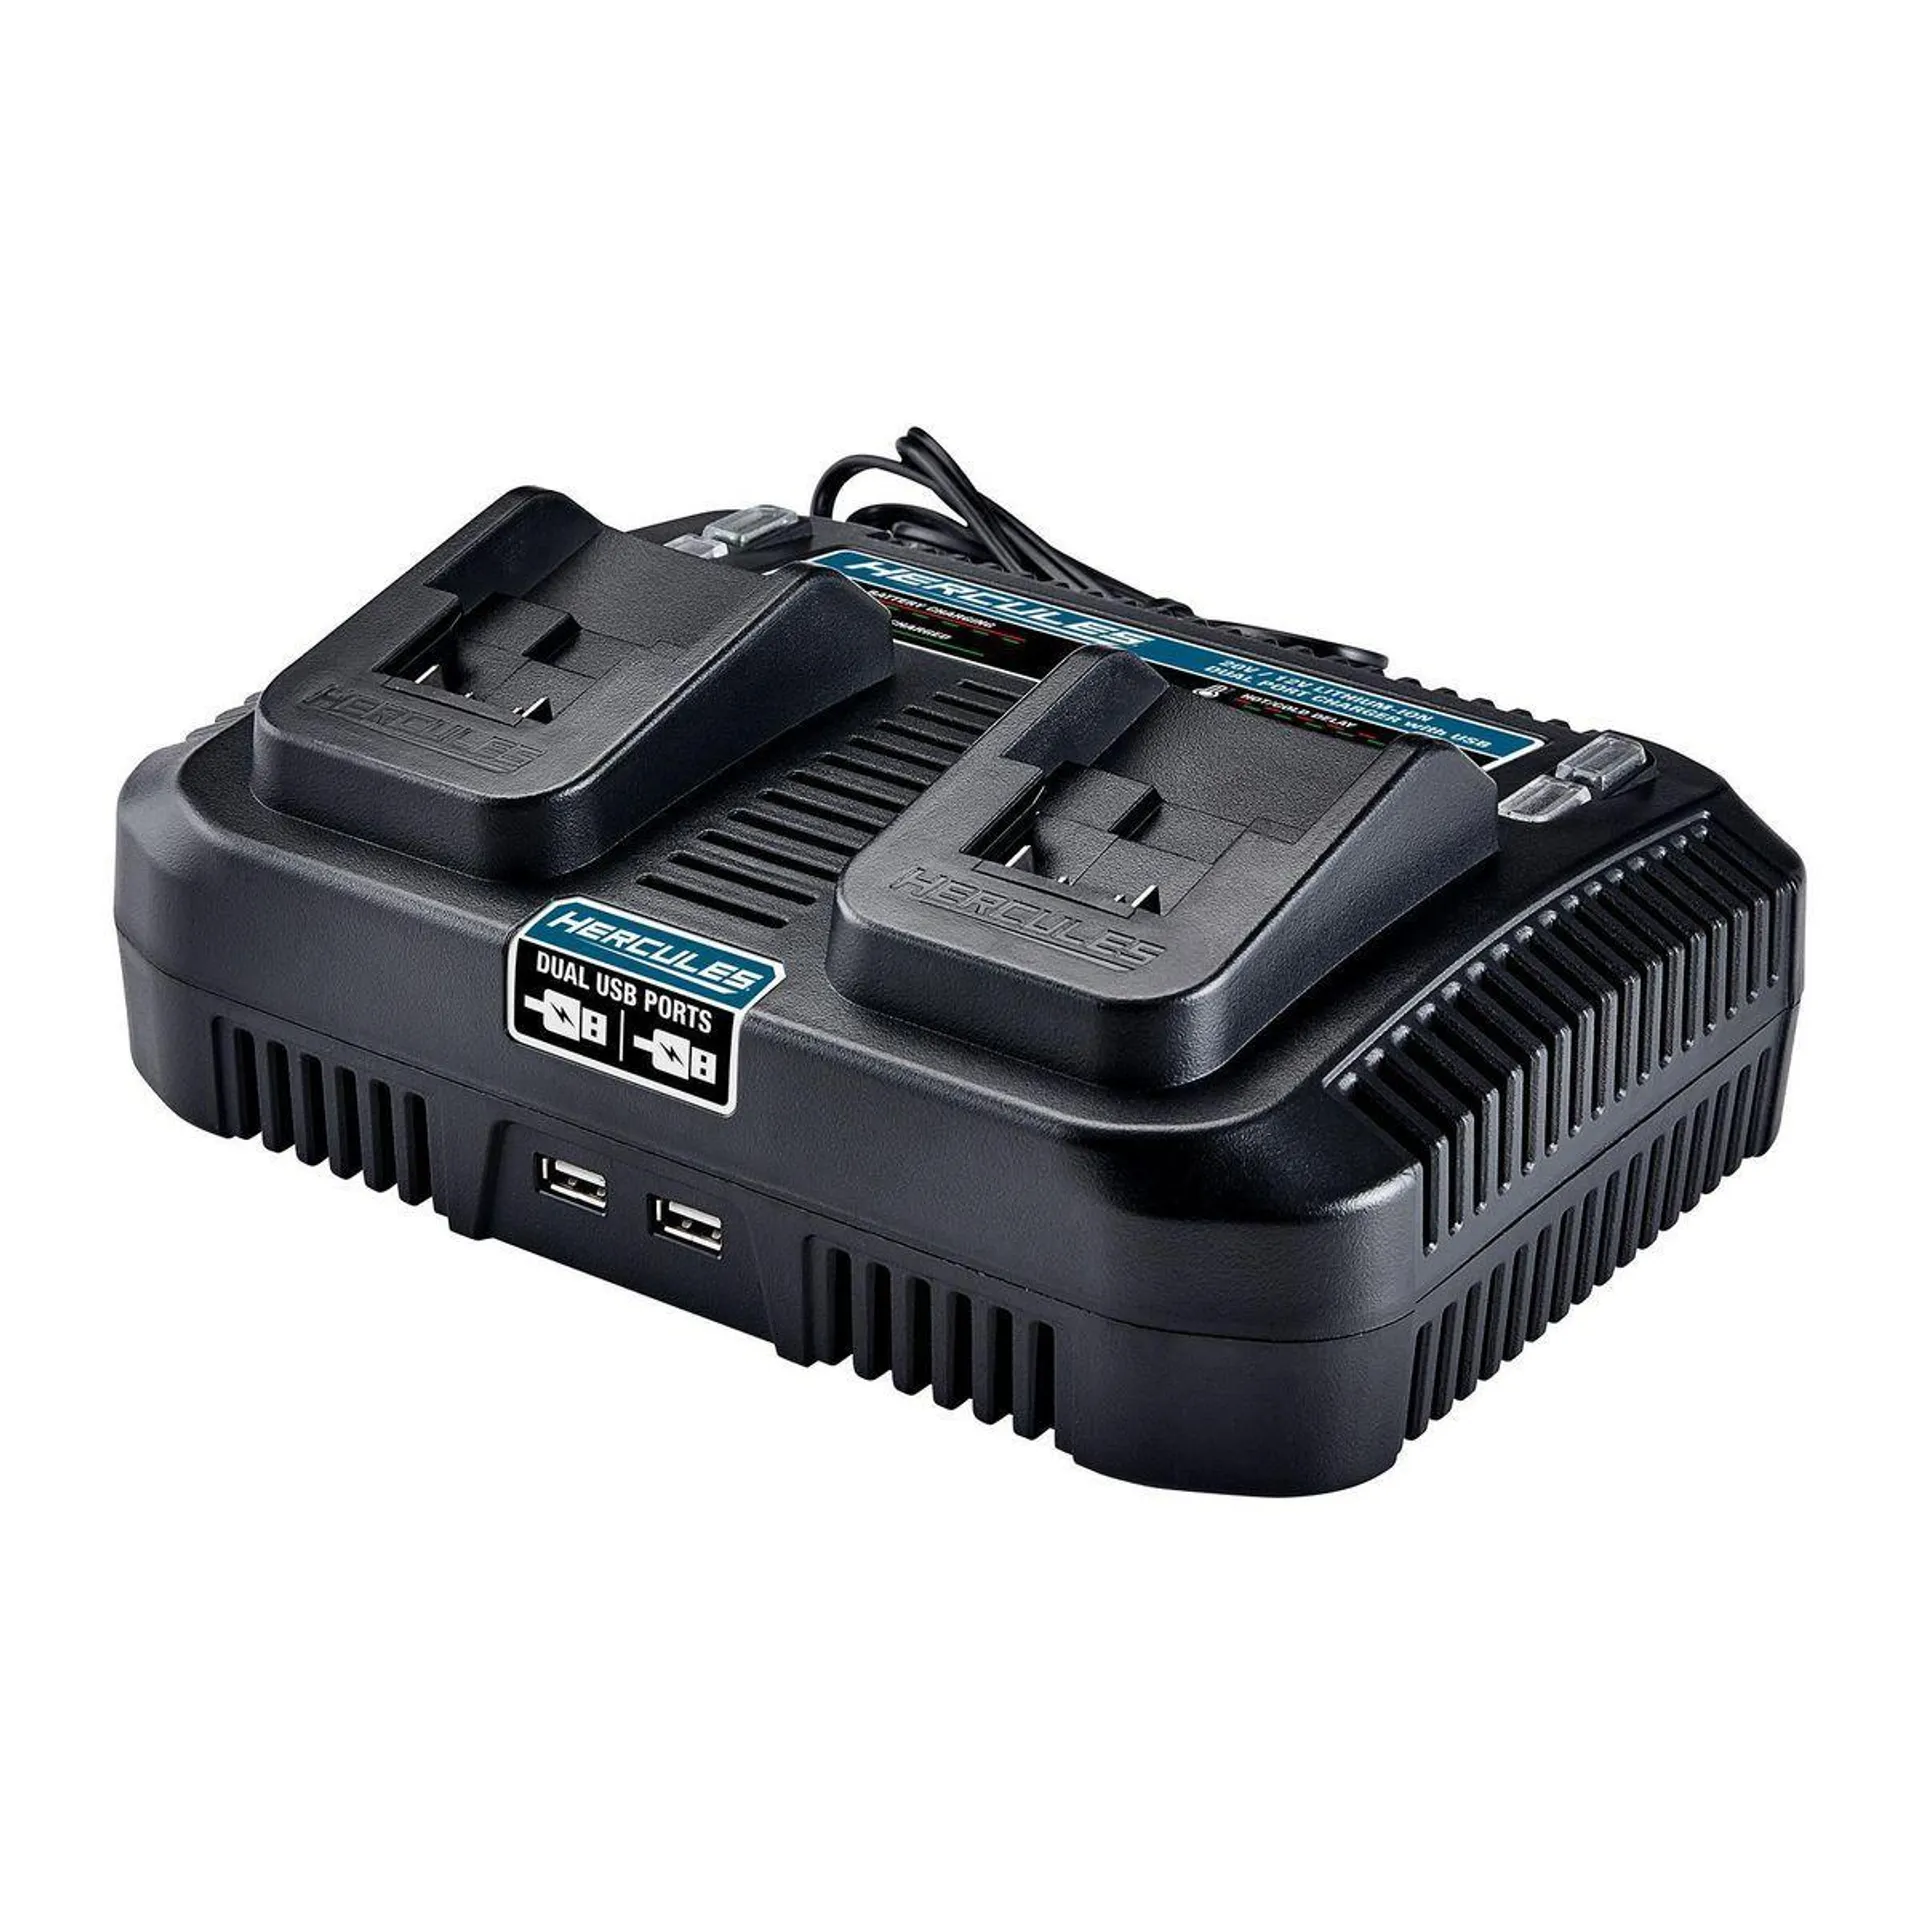 20V/12V Lithium-Ion Multivoltage Dual Port Charger with Dual USB